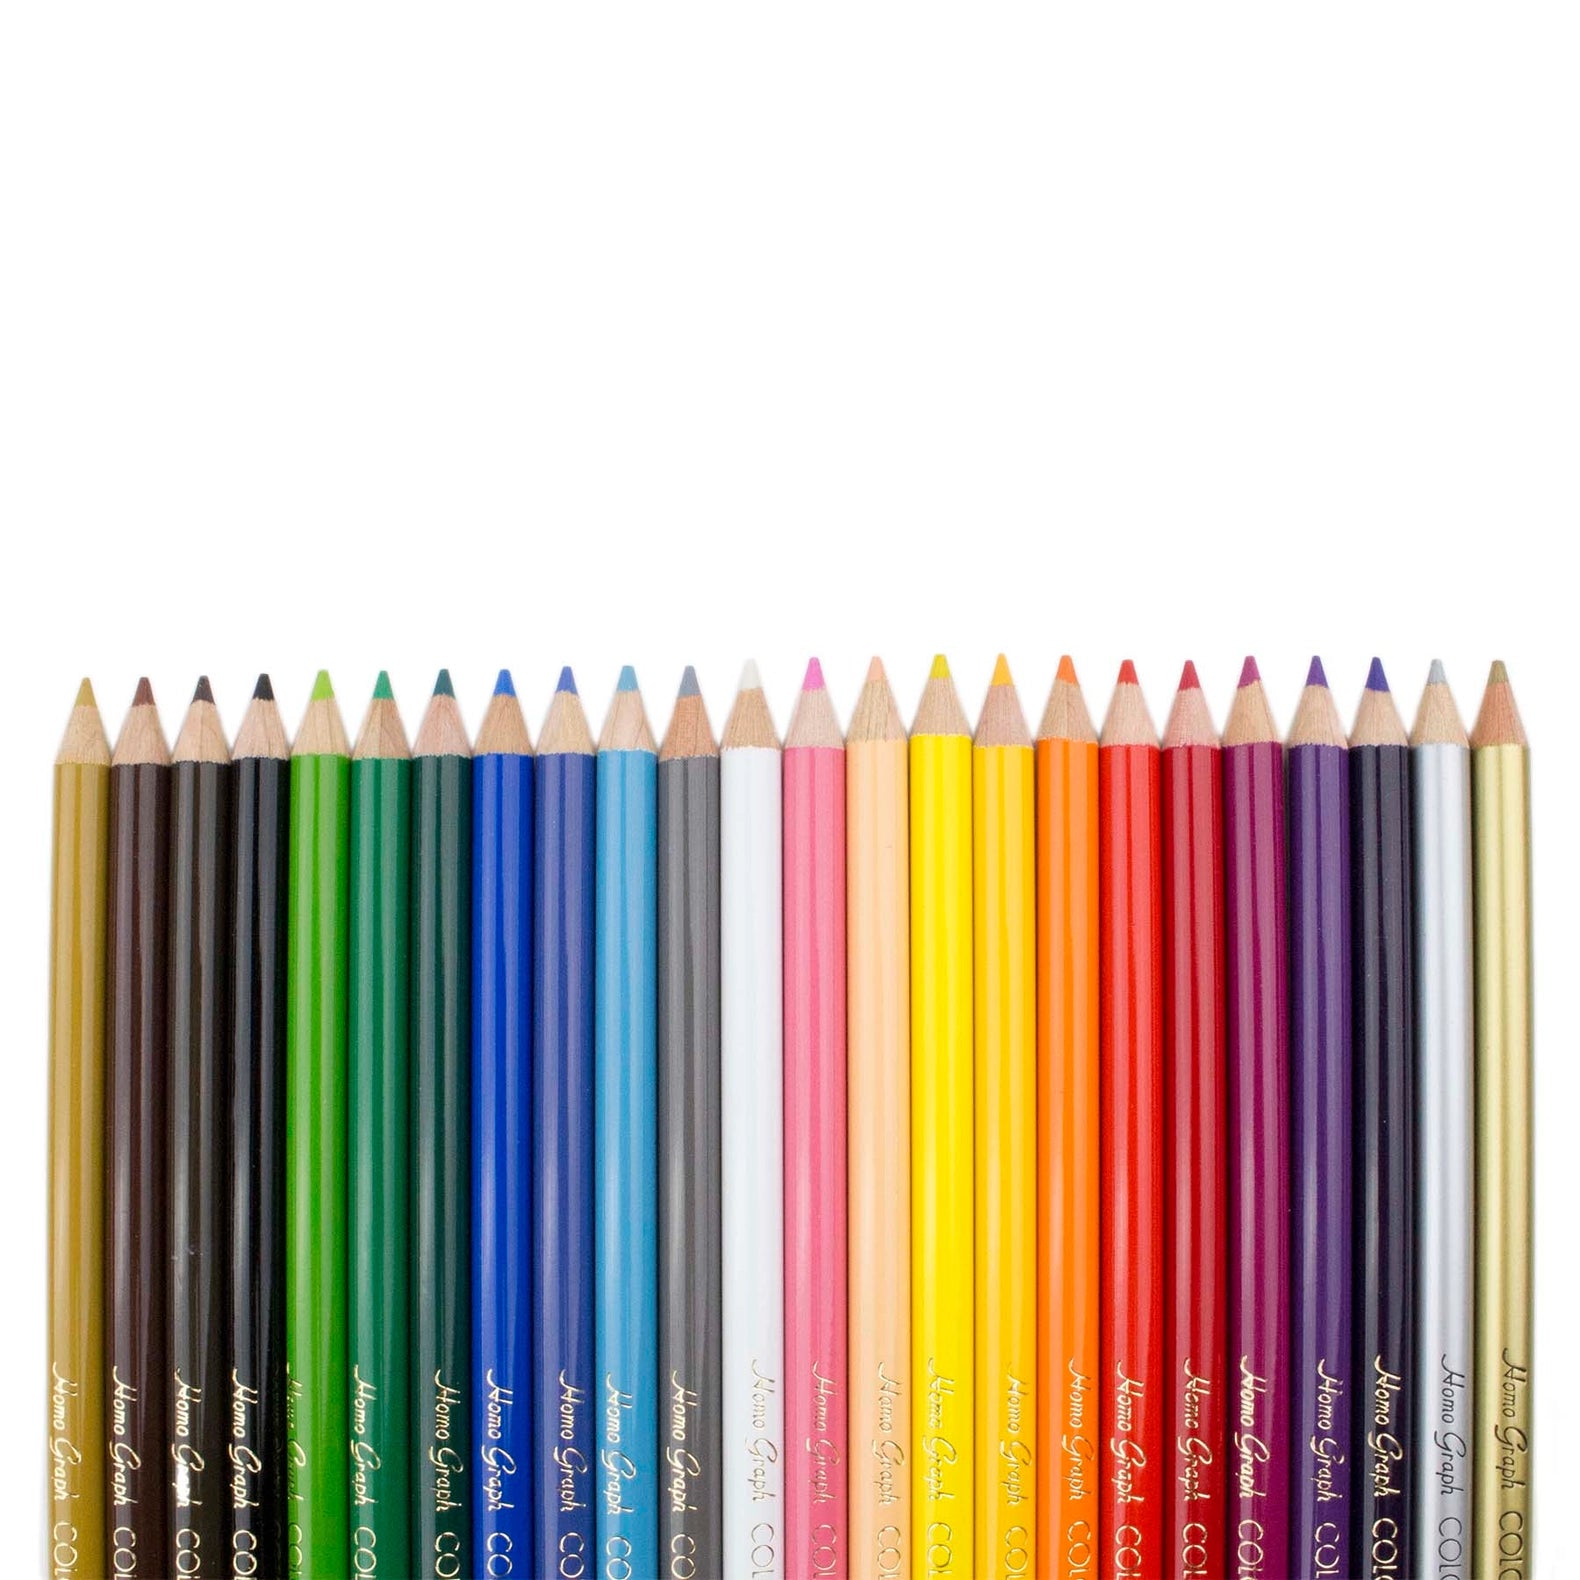 Tombow 1500 Series 24 Piece Colored Pencil Set